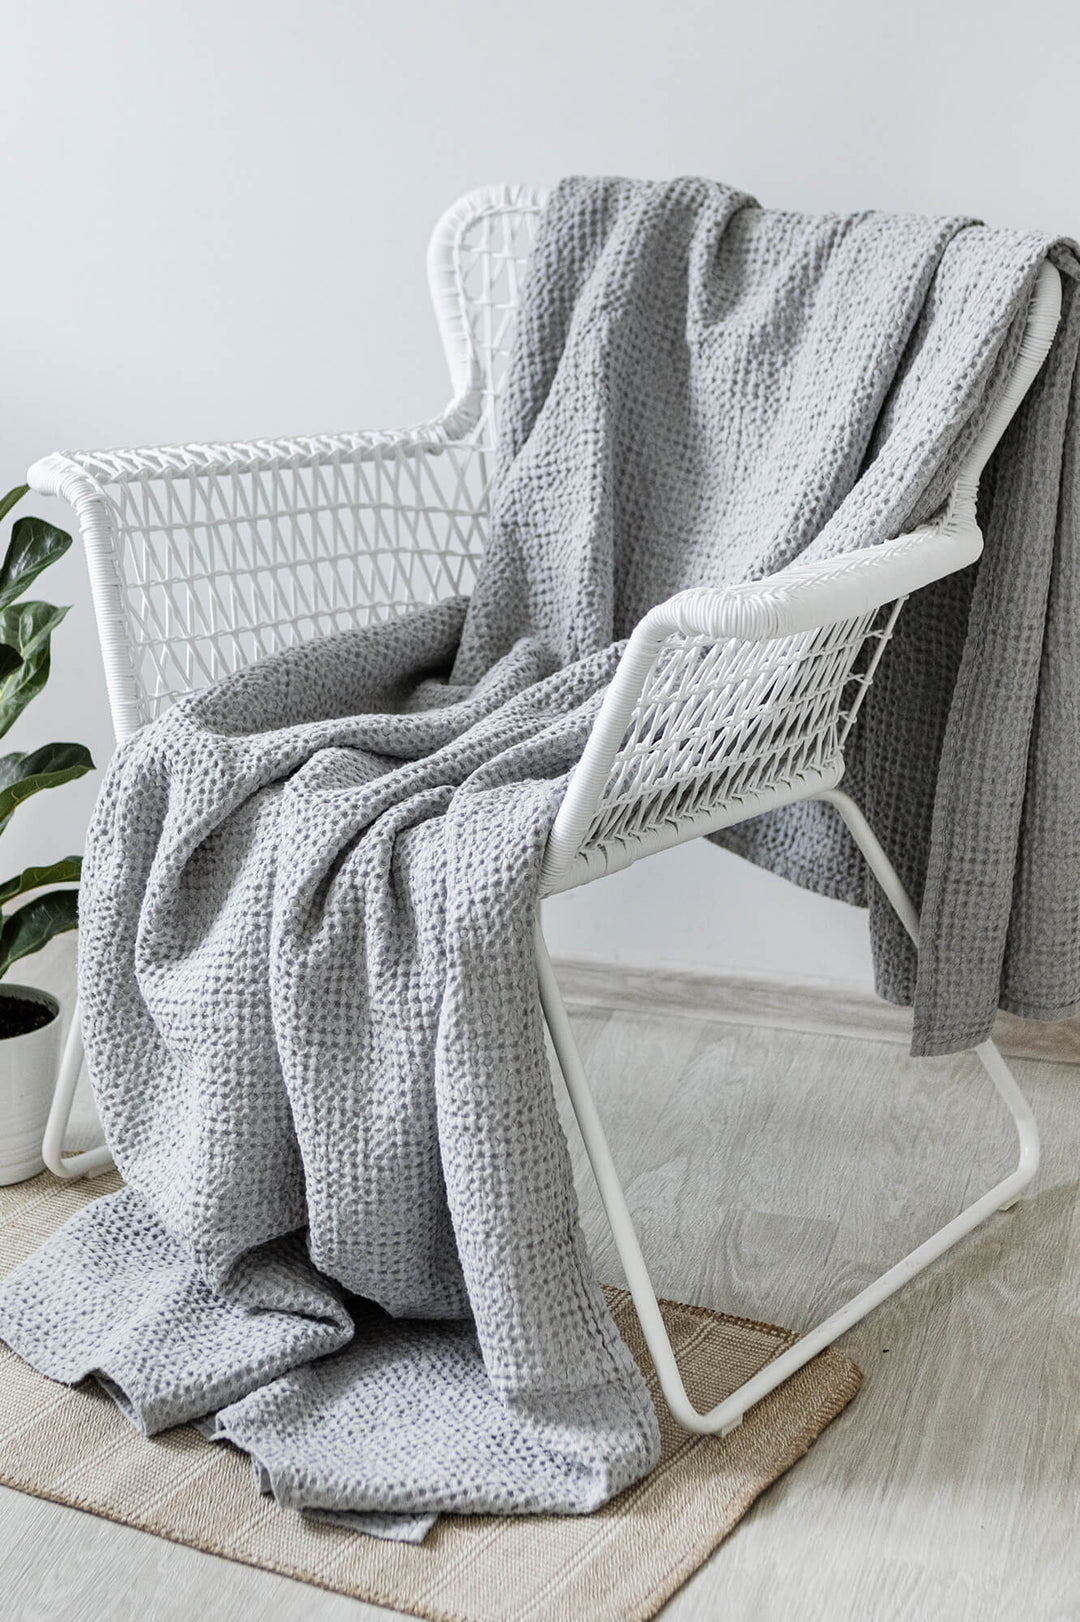 Large waffle blanket throw in Light Gray color - Easy Linen Crafts